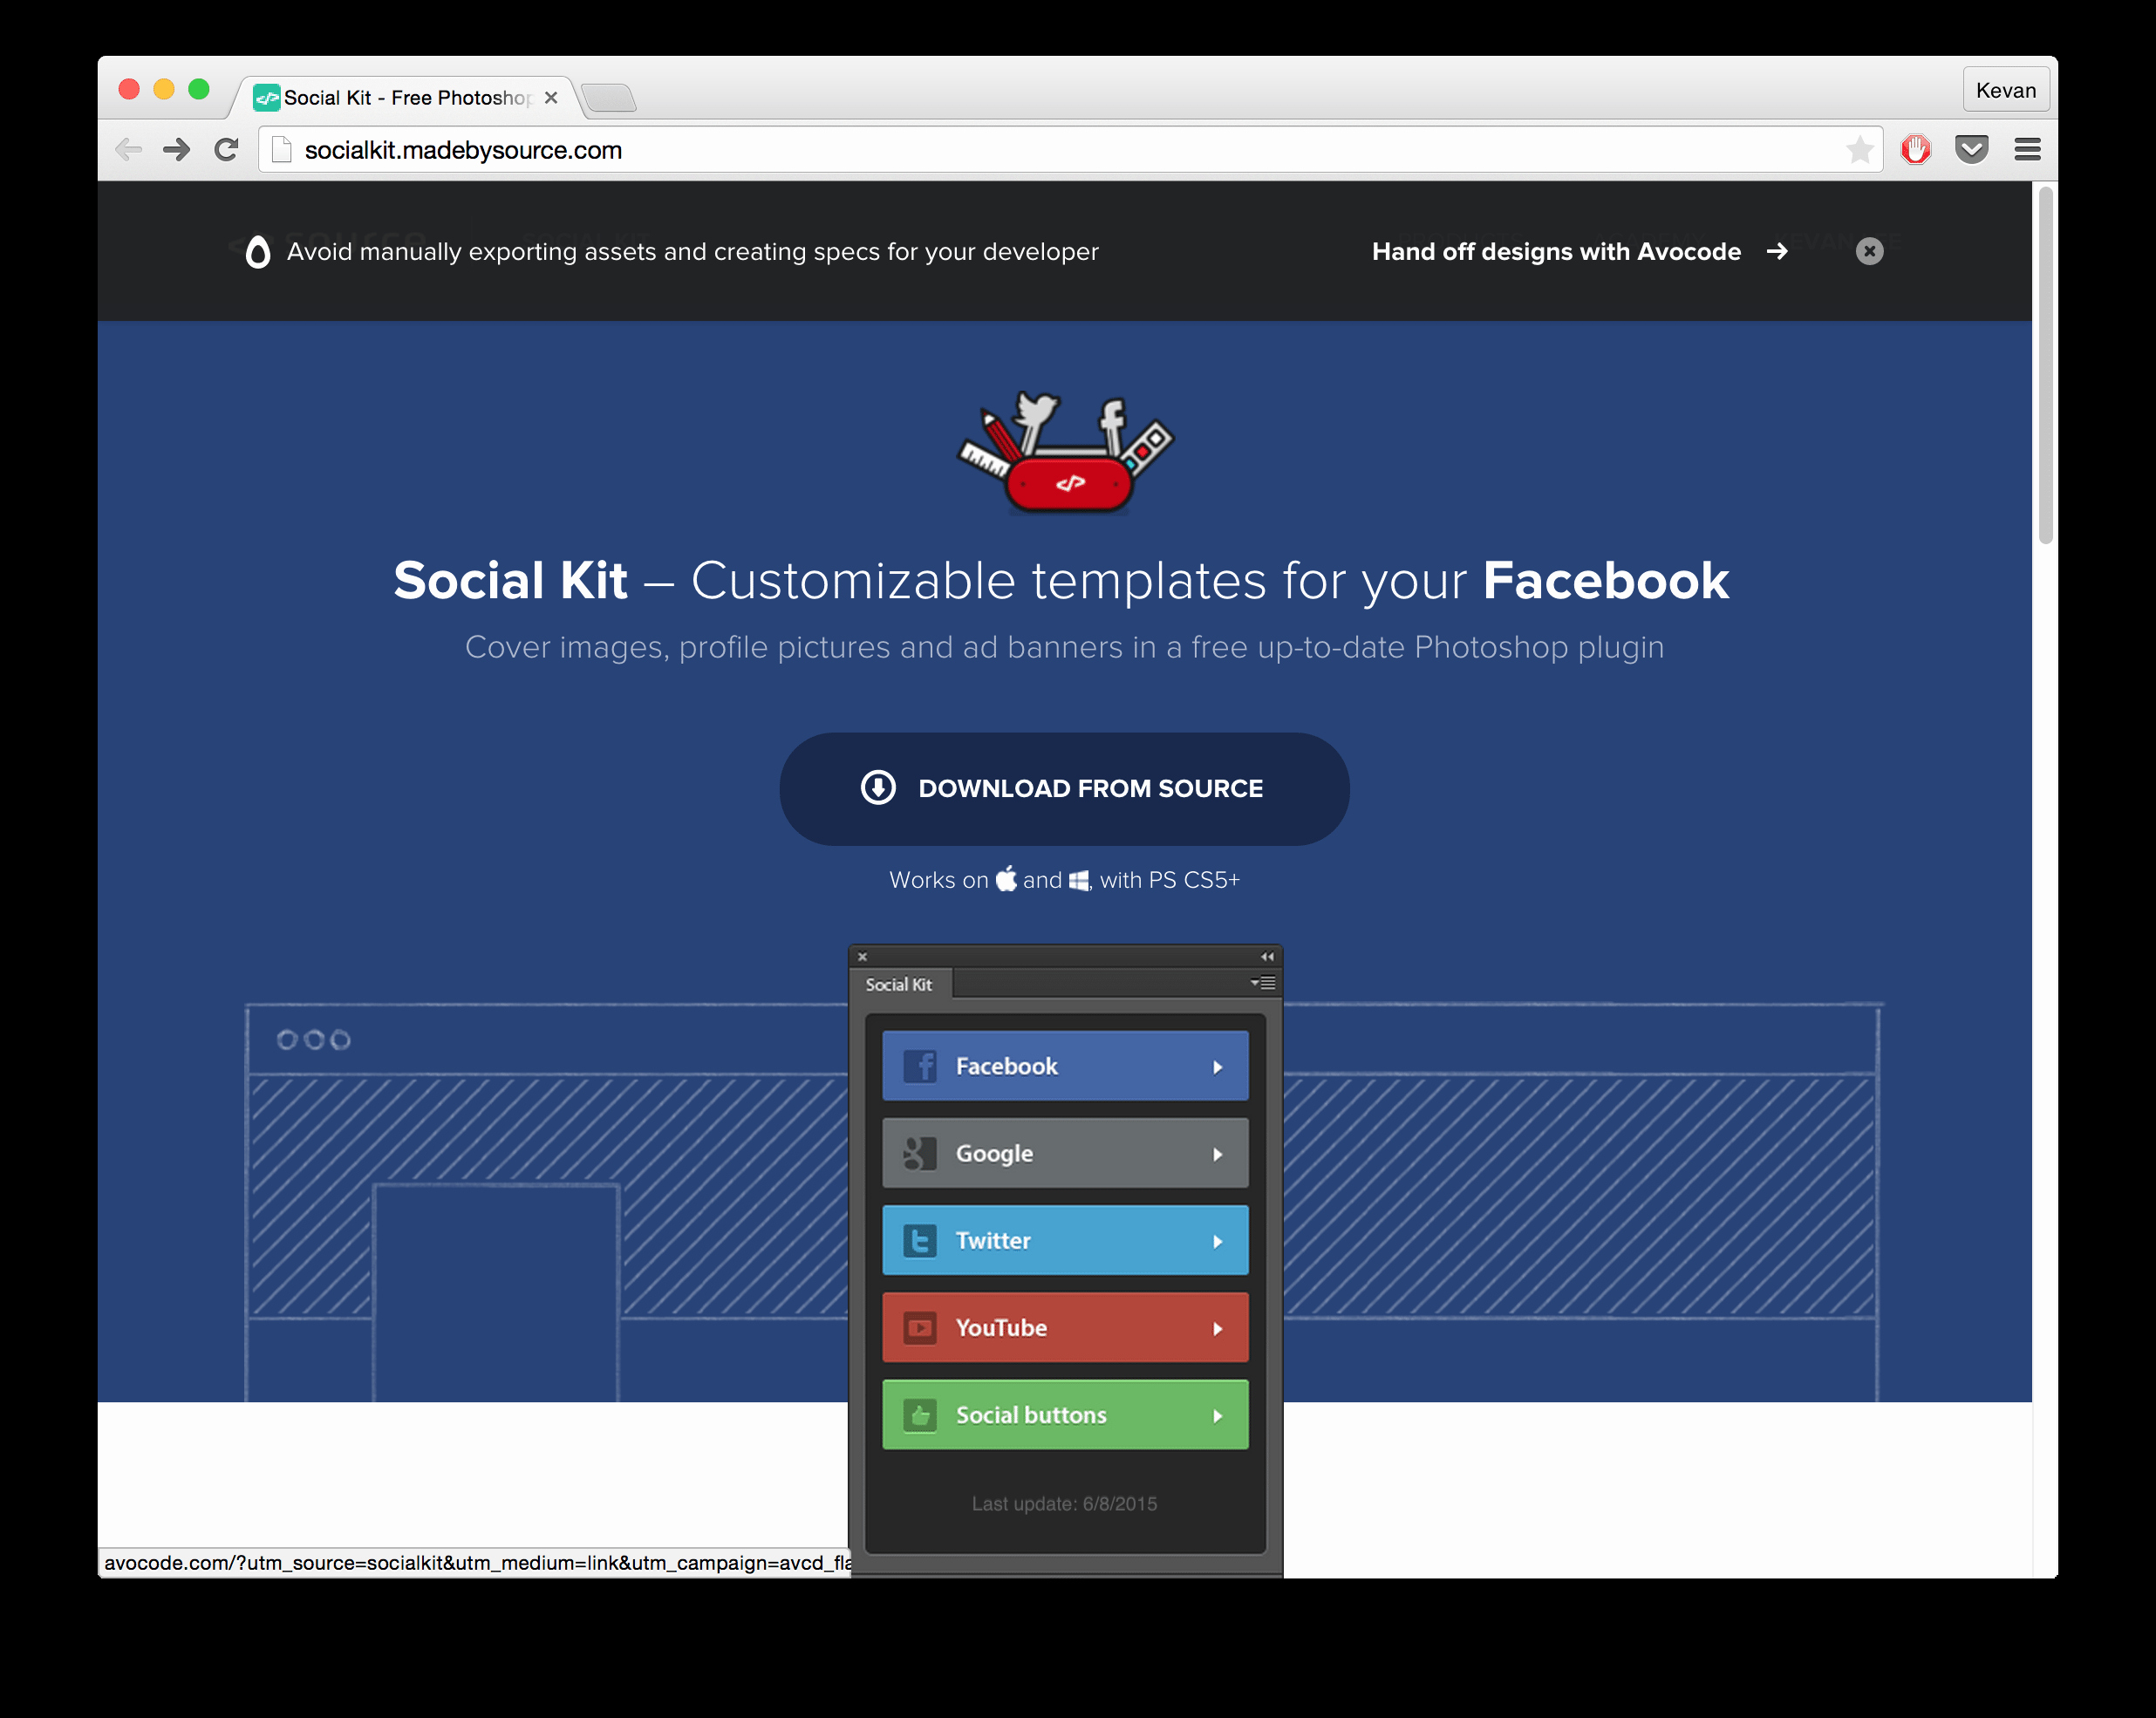 15 New social Media Templates to Save You even More Time